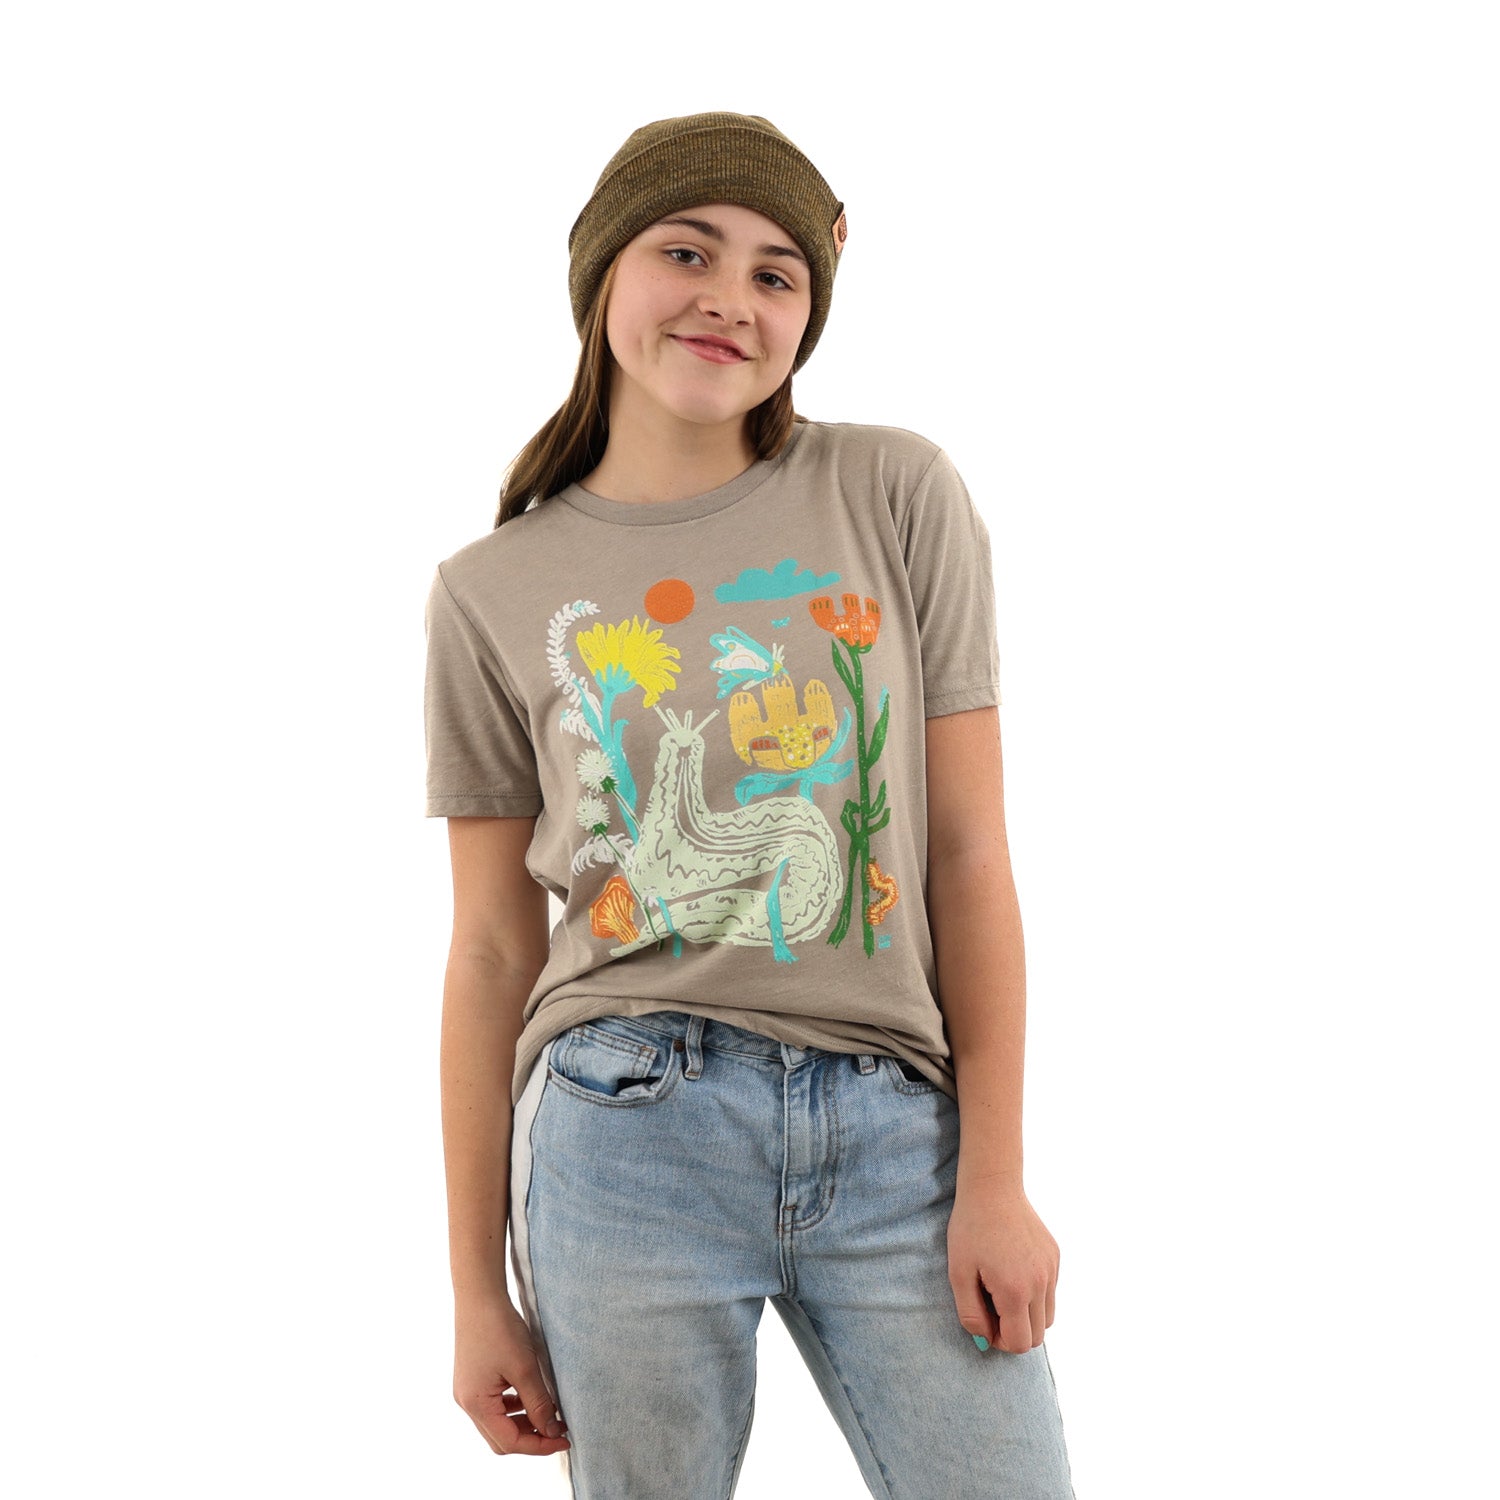 Girl wearing light brown t shirt with colorful print of plants and bugs